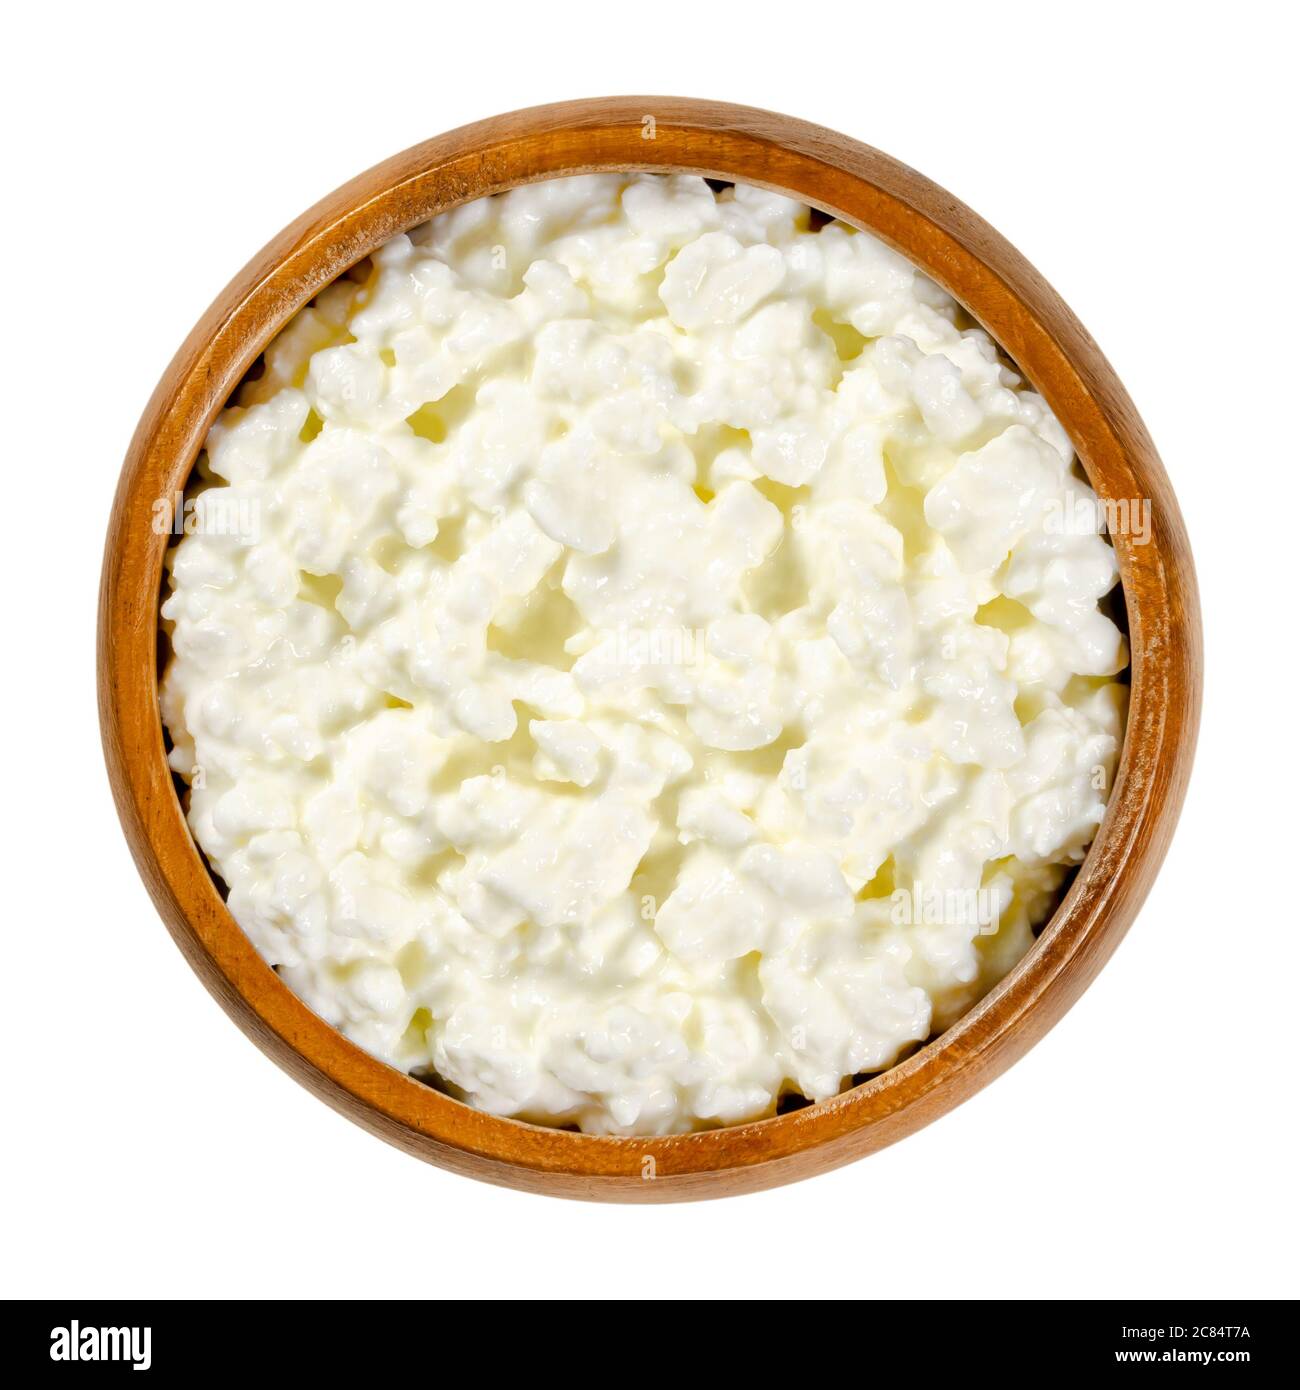 Cottage cheese in wooden bowl. Fresh cheese curd product also known as curds and whey,  with mild flavor. A cream is added to the curd grains. Stock Photo